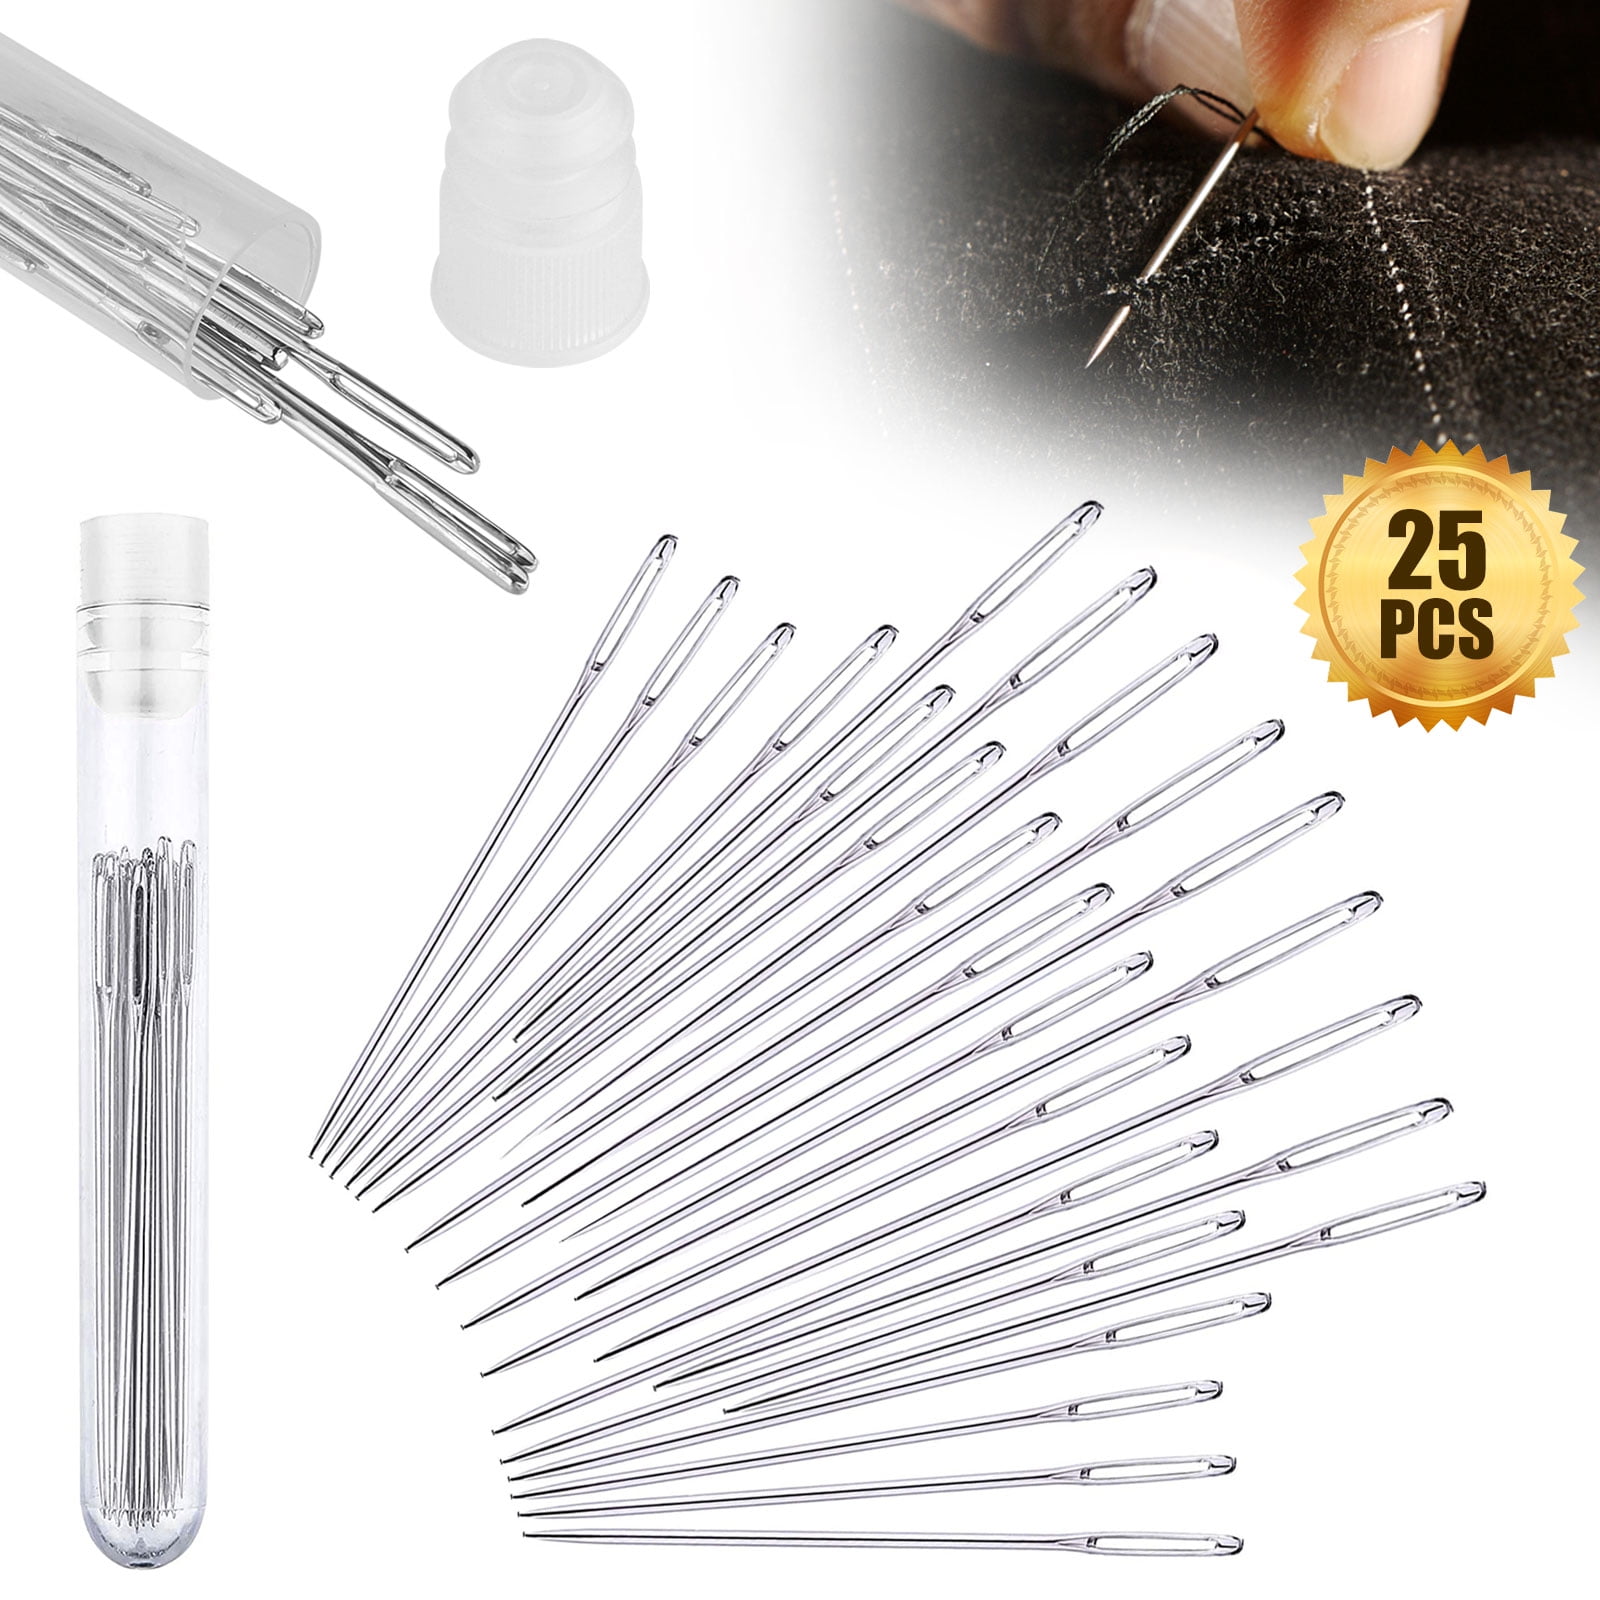 Ownsig 20 Pieces Large-Eye Stitching Needles Hand Sewing Needles for Leather Projects 